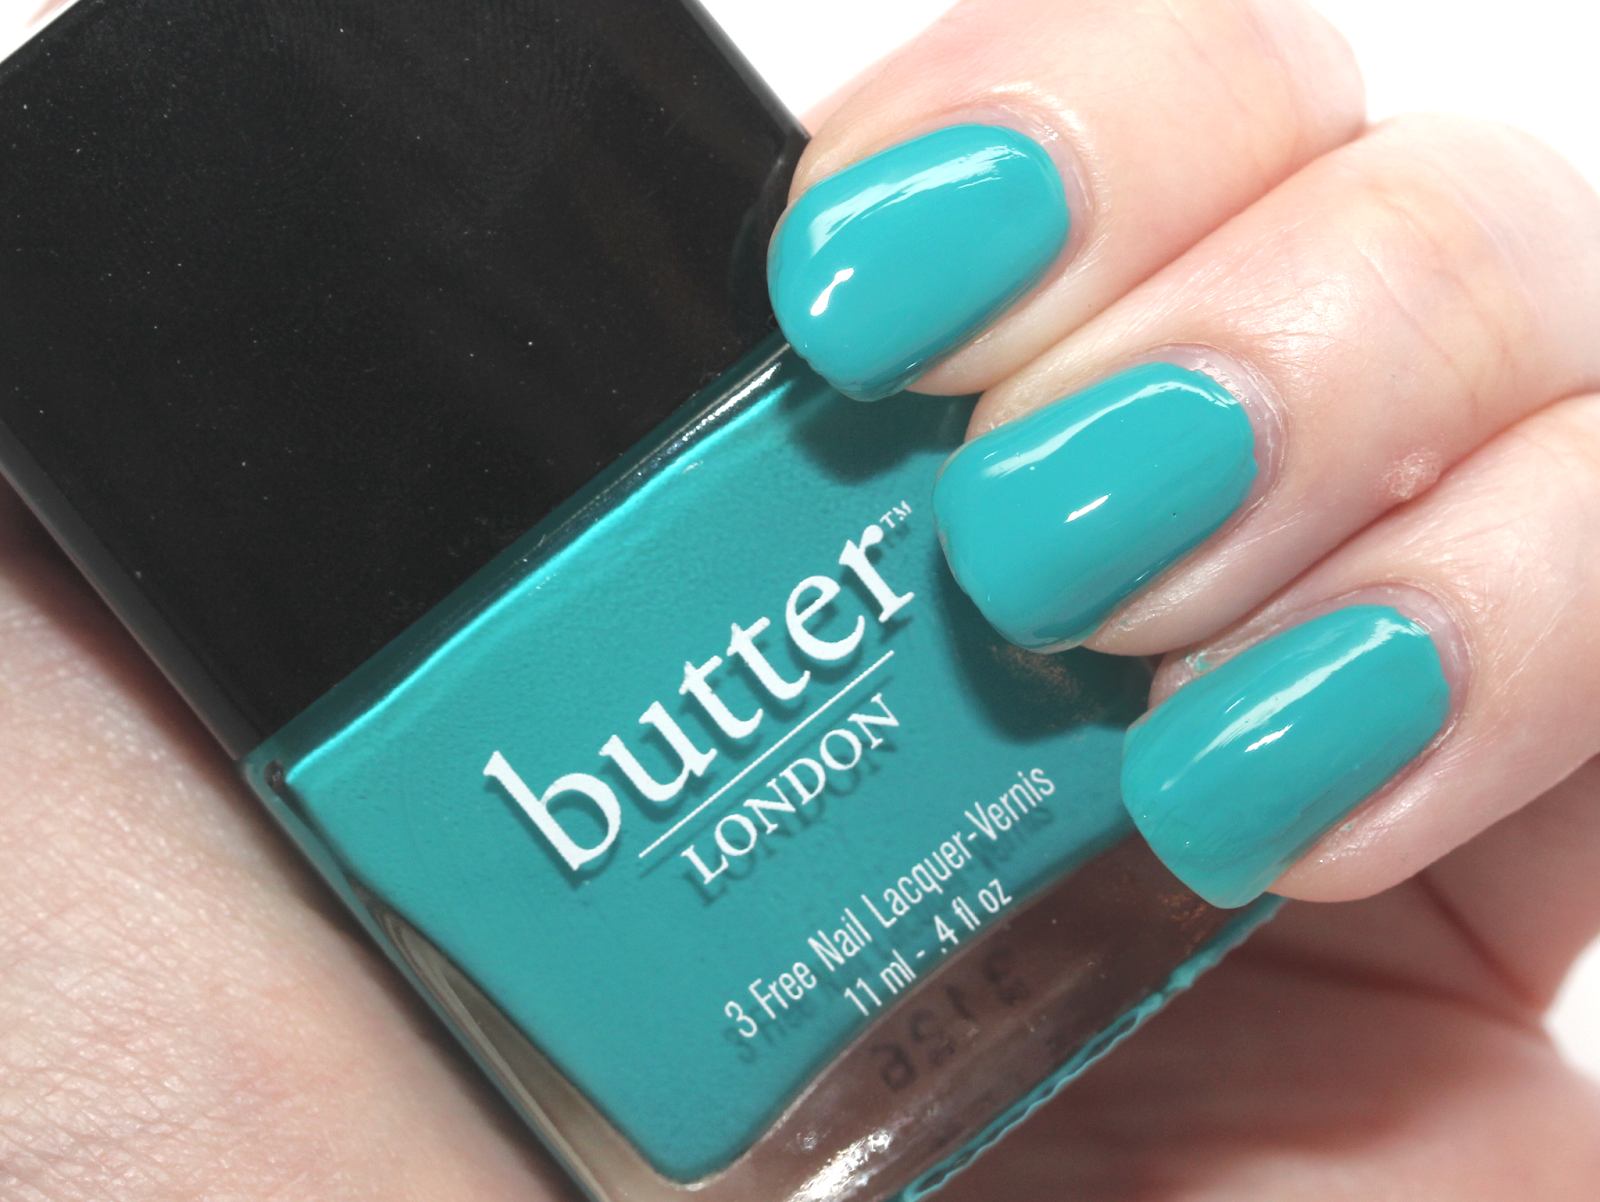 6. Butter London Nail Lacquer in "Fruit Machine" - wide 7